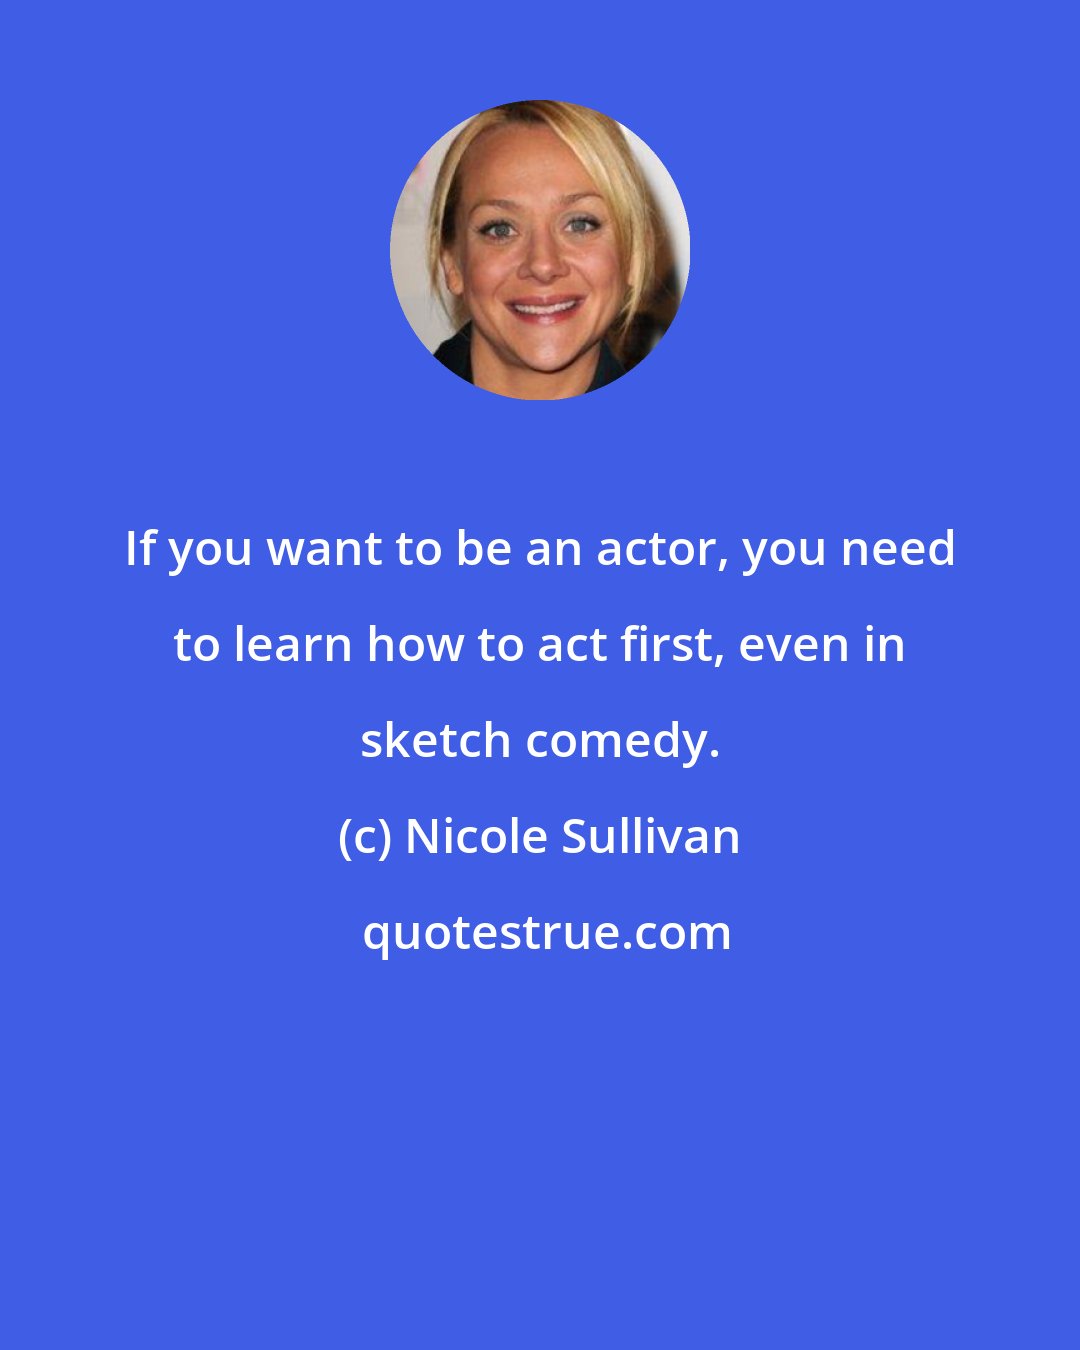 Nicole Sullivan: If you want to be an actor, you need to learn how to act first, even in sketch comedy.